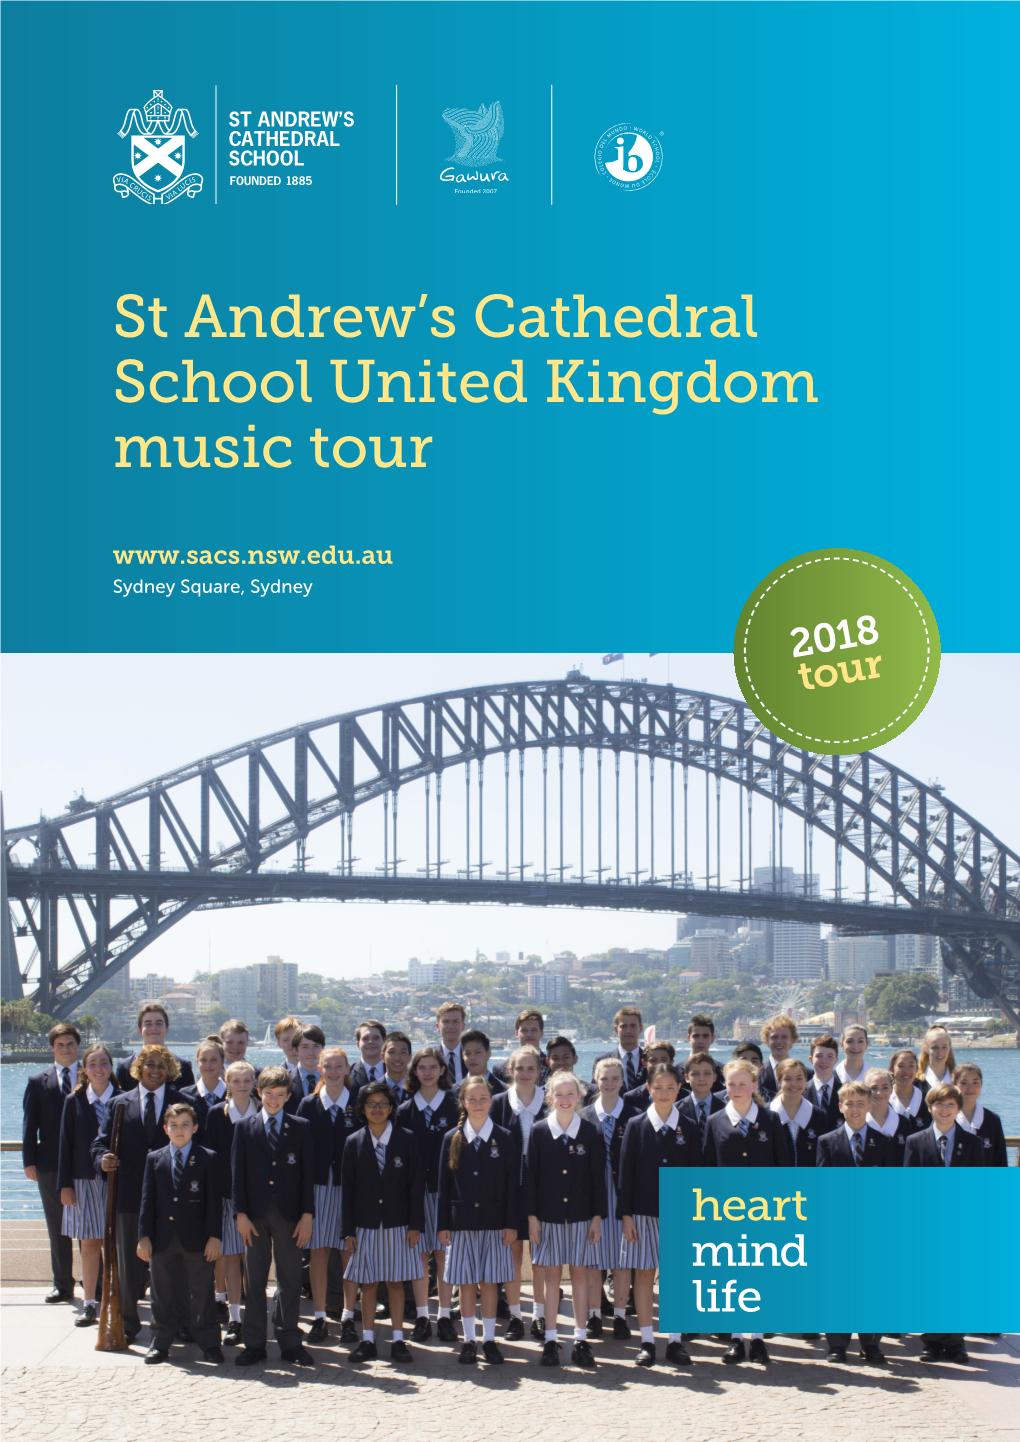 St Andrew's Cathedral School United Kingdom Music Tour